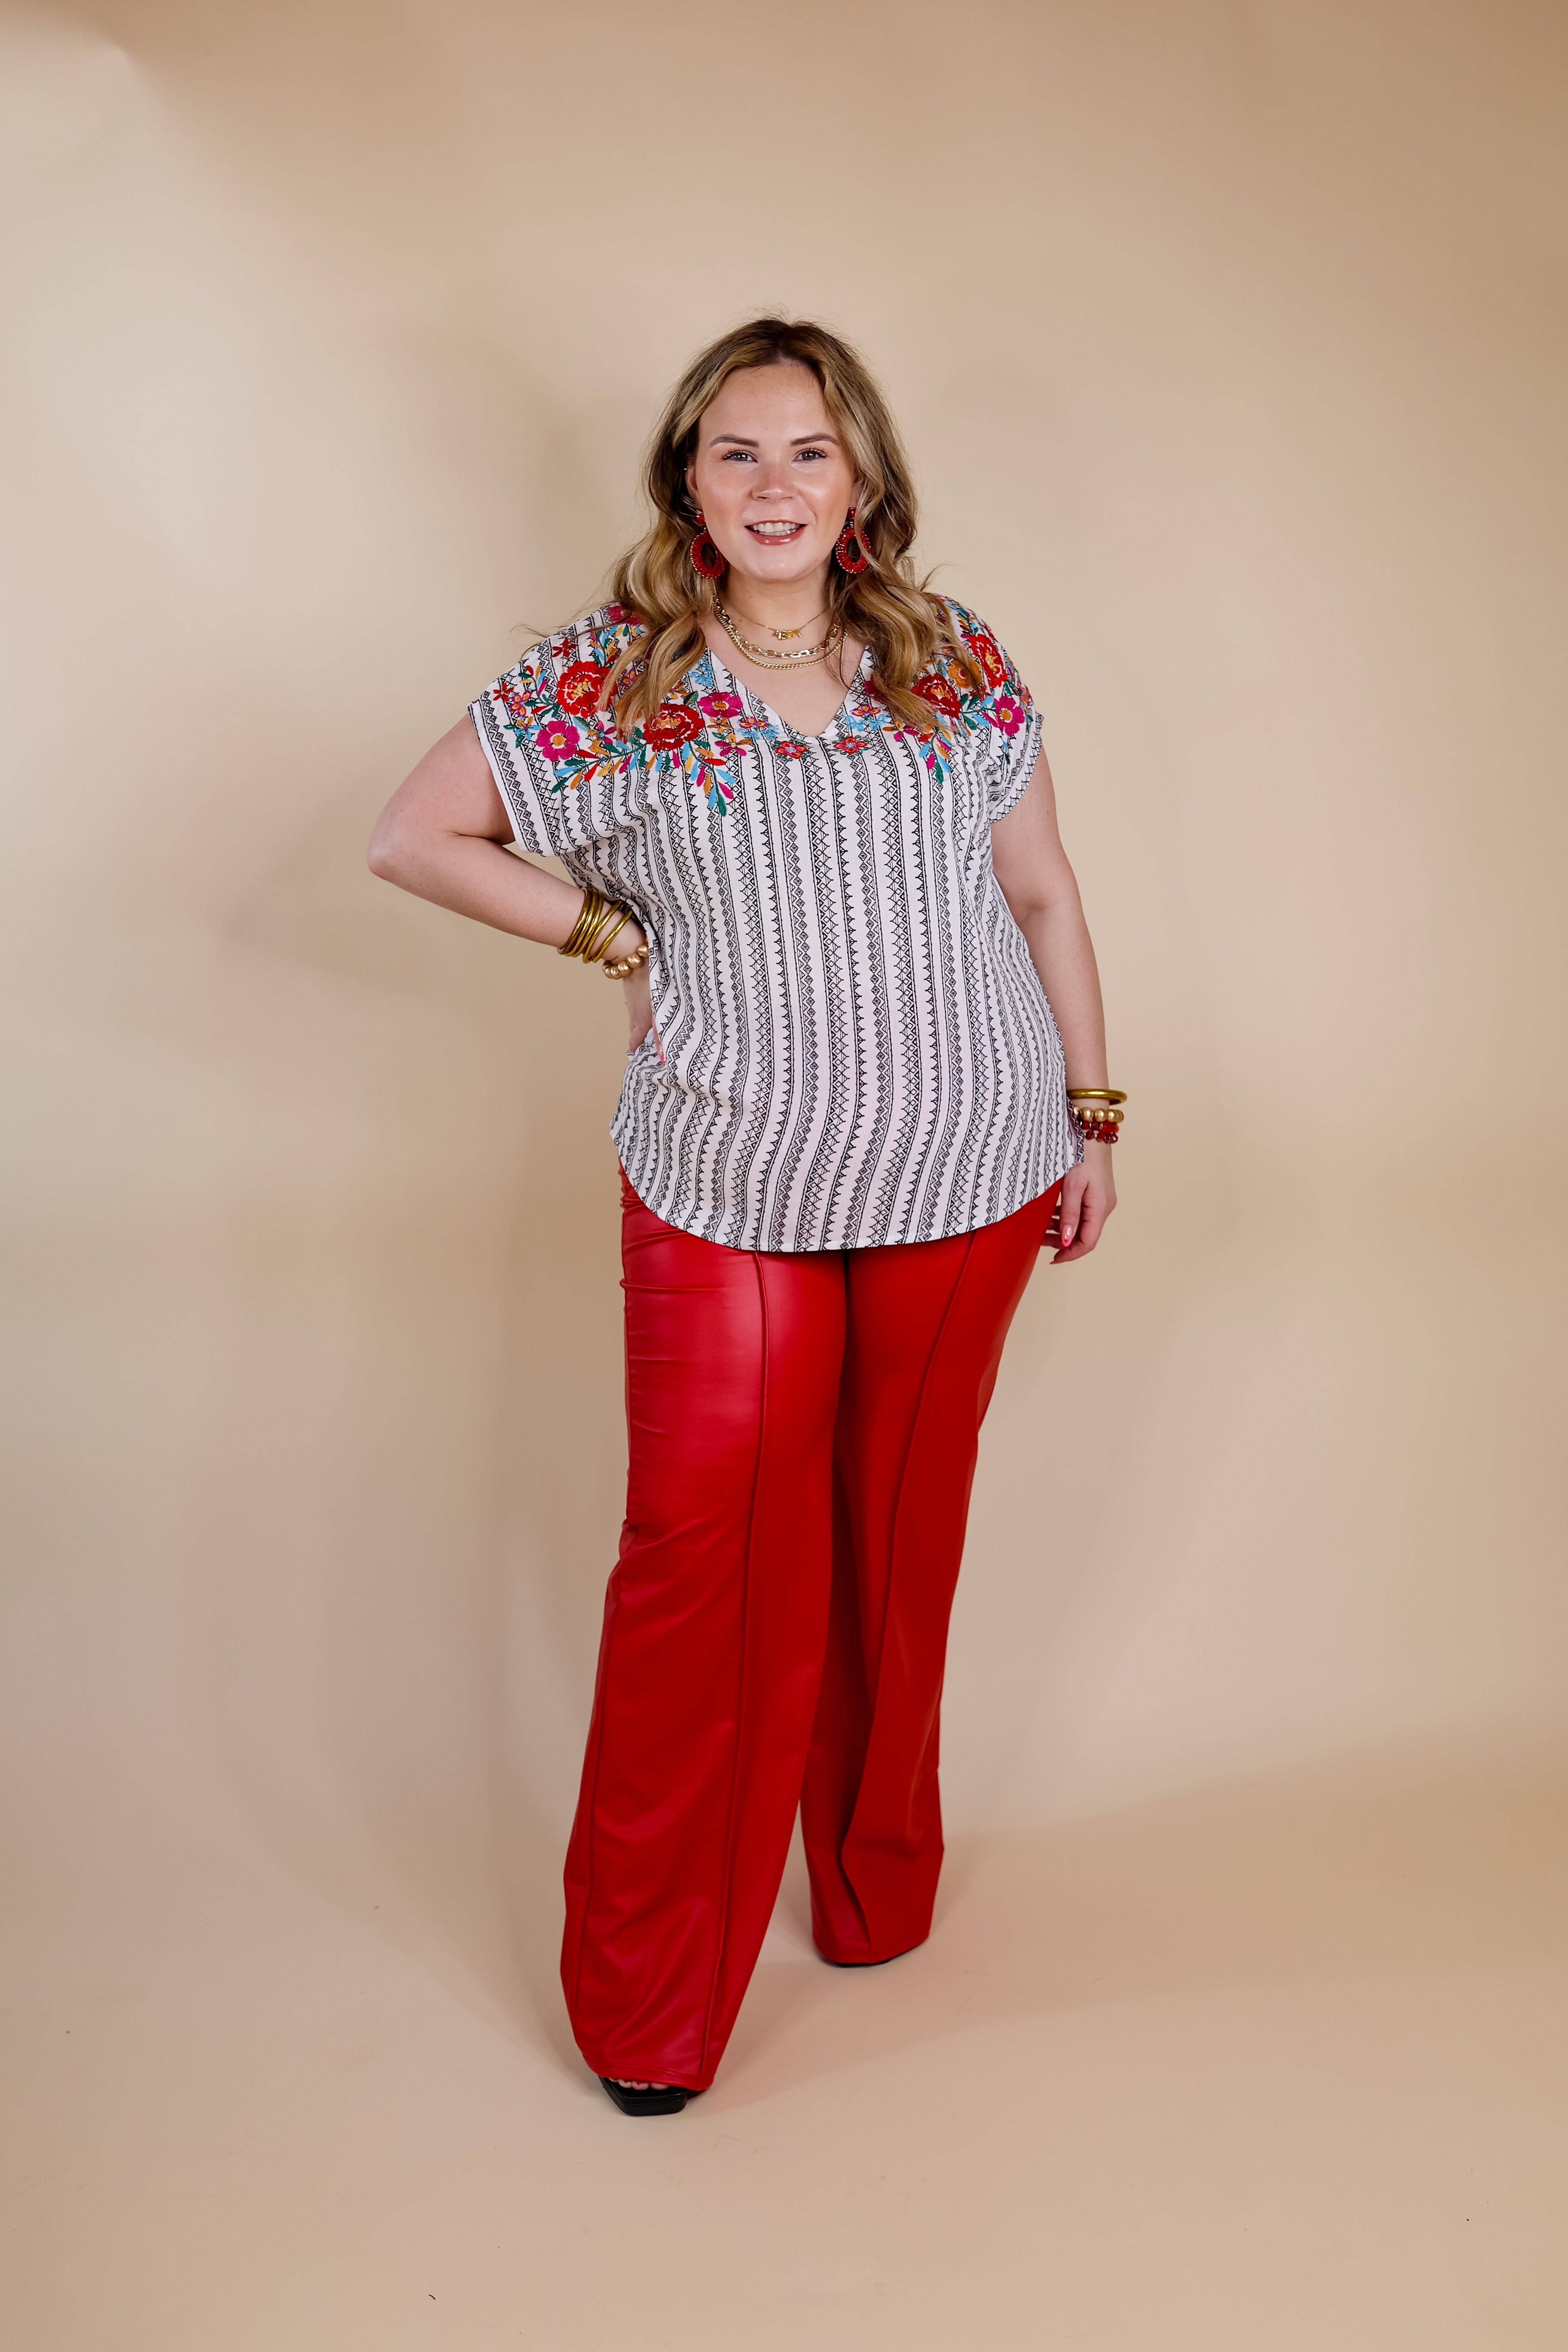 Happy Rush Tribal Stripe V Neck Top with Floral Embroidery in White - Giddy Up Glamour Boutique